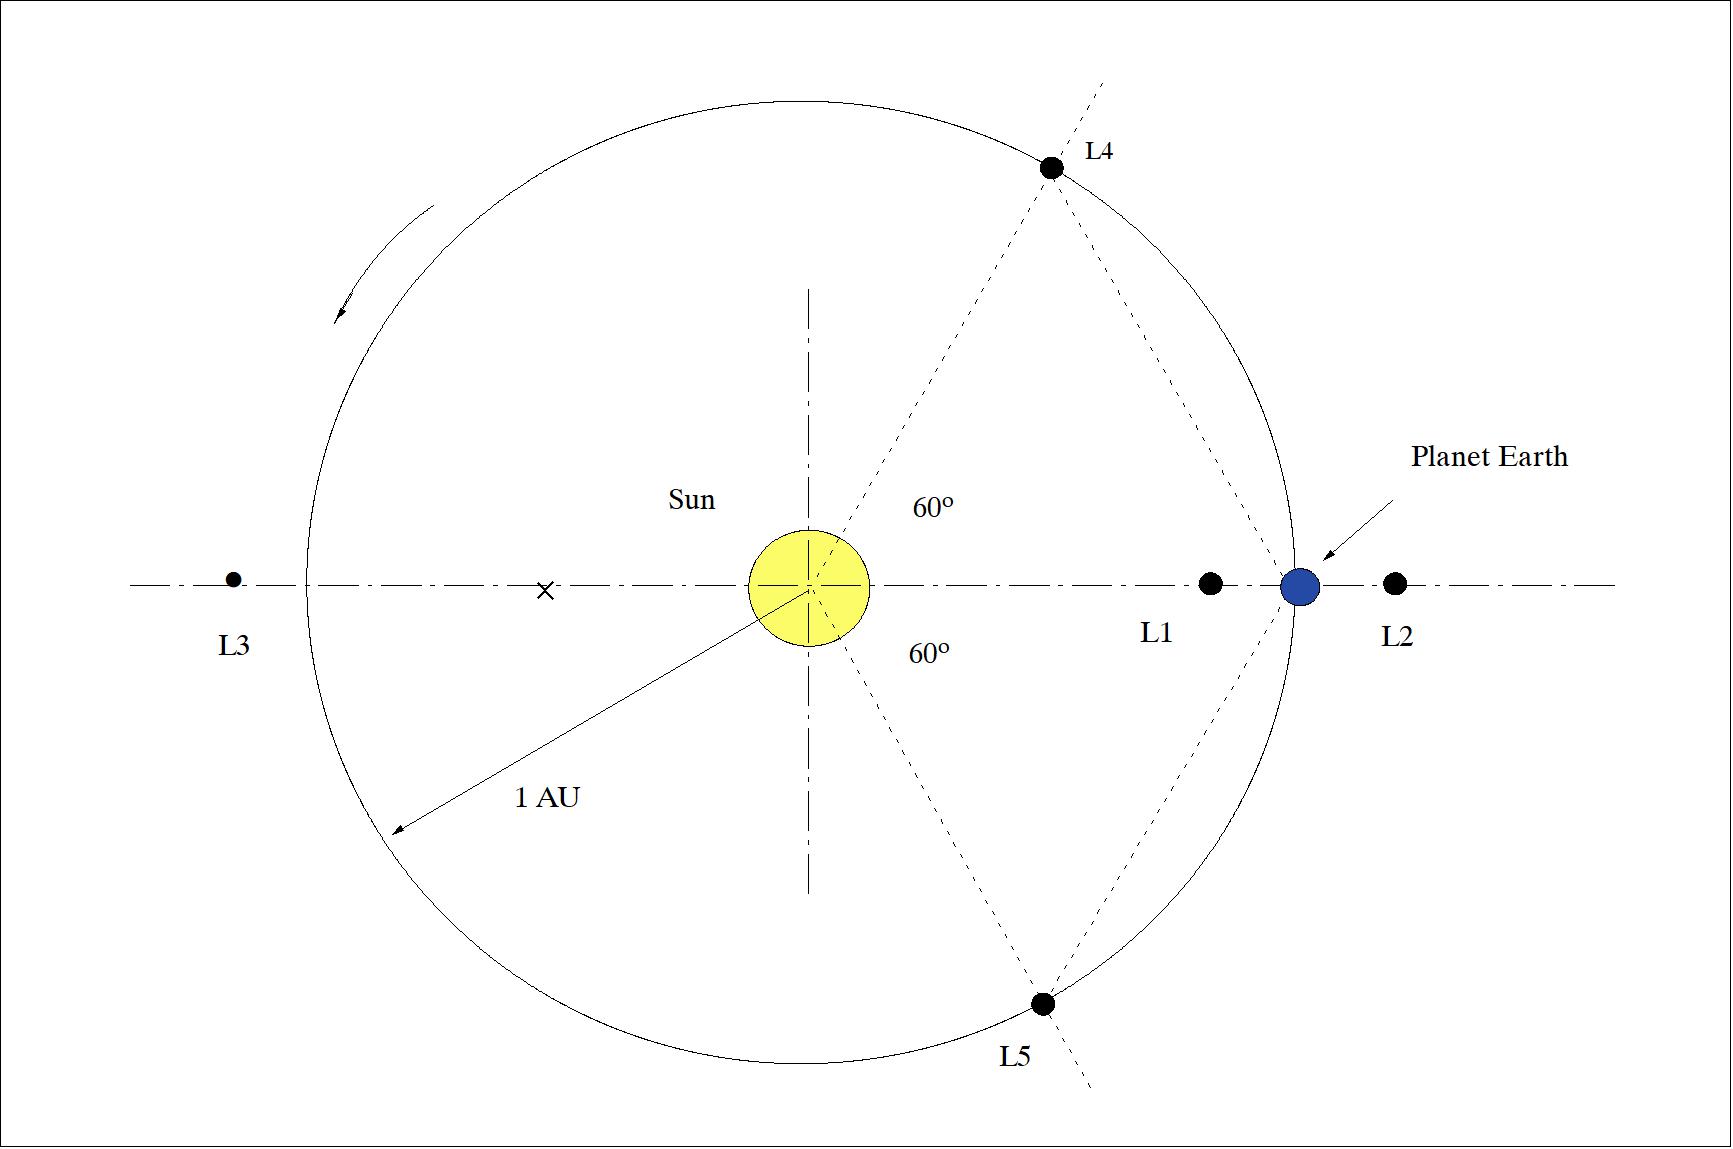 Figure 5: Locations of the five Lagrangian points in the Sun-Earth system